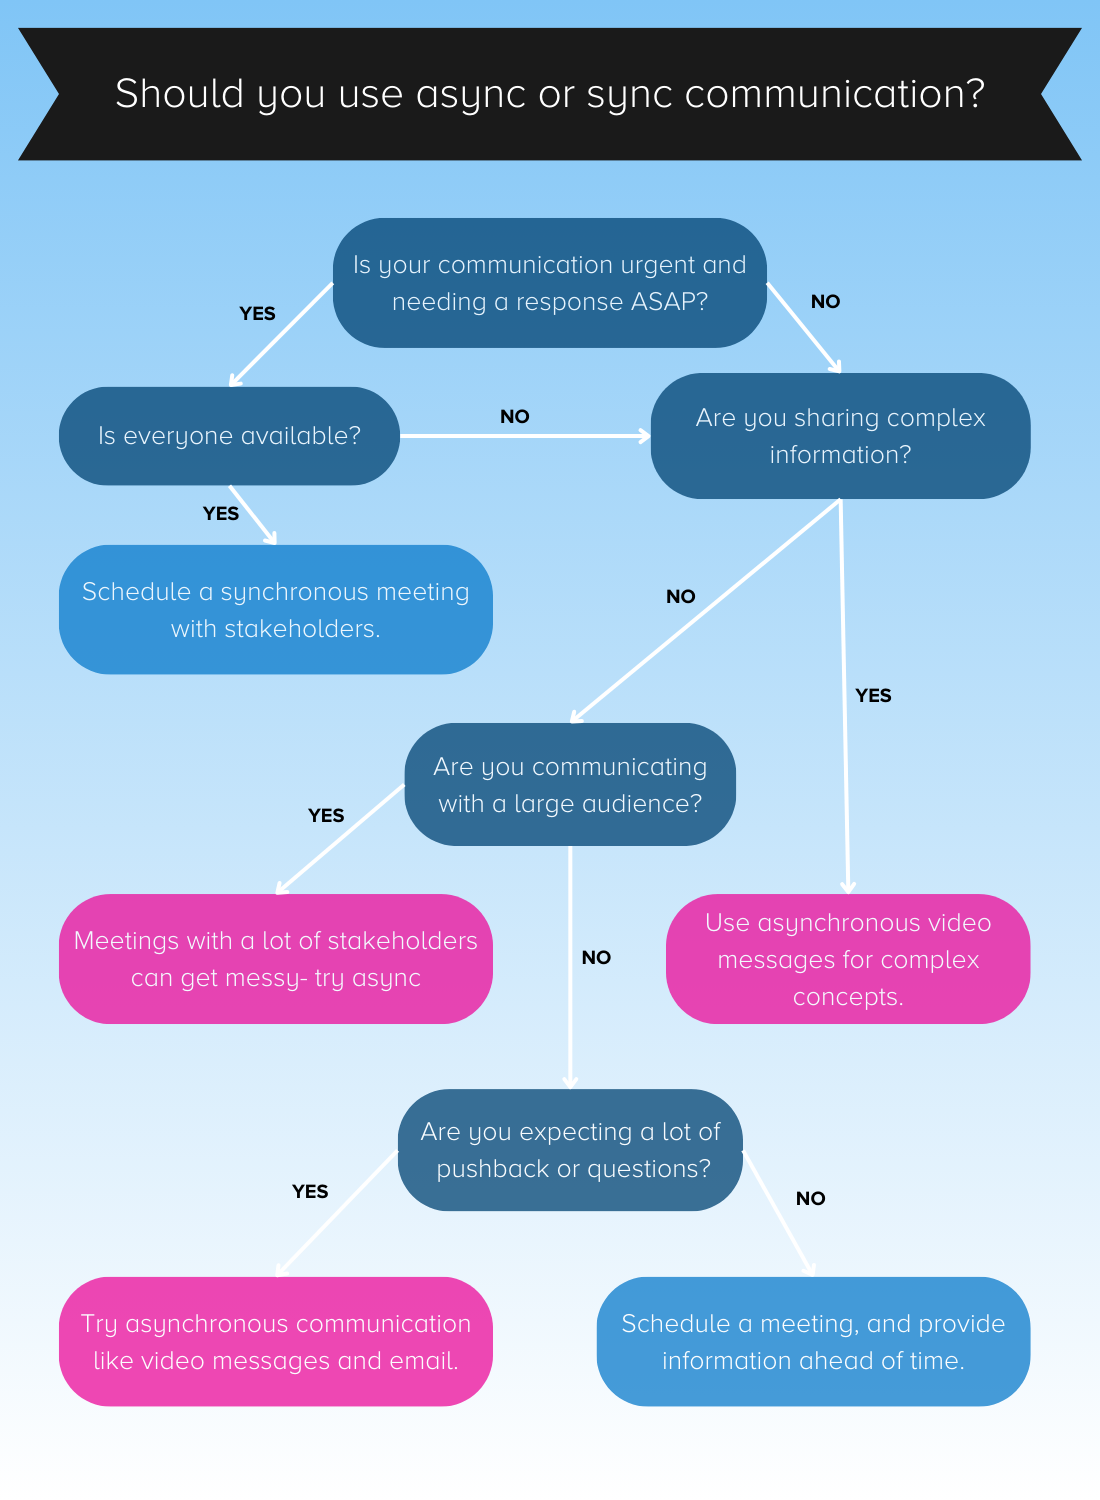 Decision tree to show off the thought process behind synchronous and asynchronous meetings.